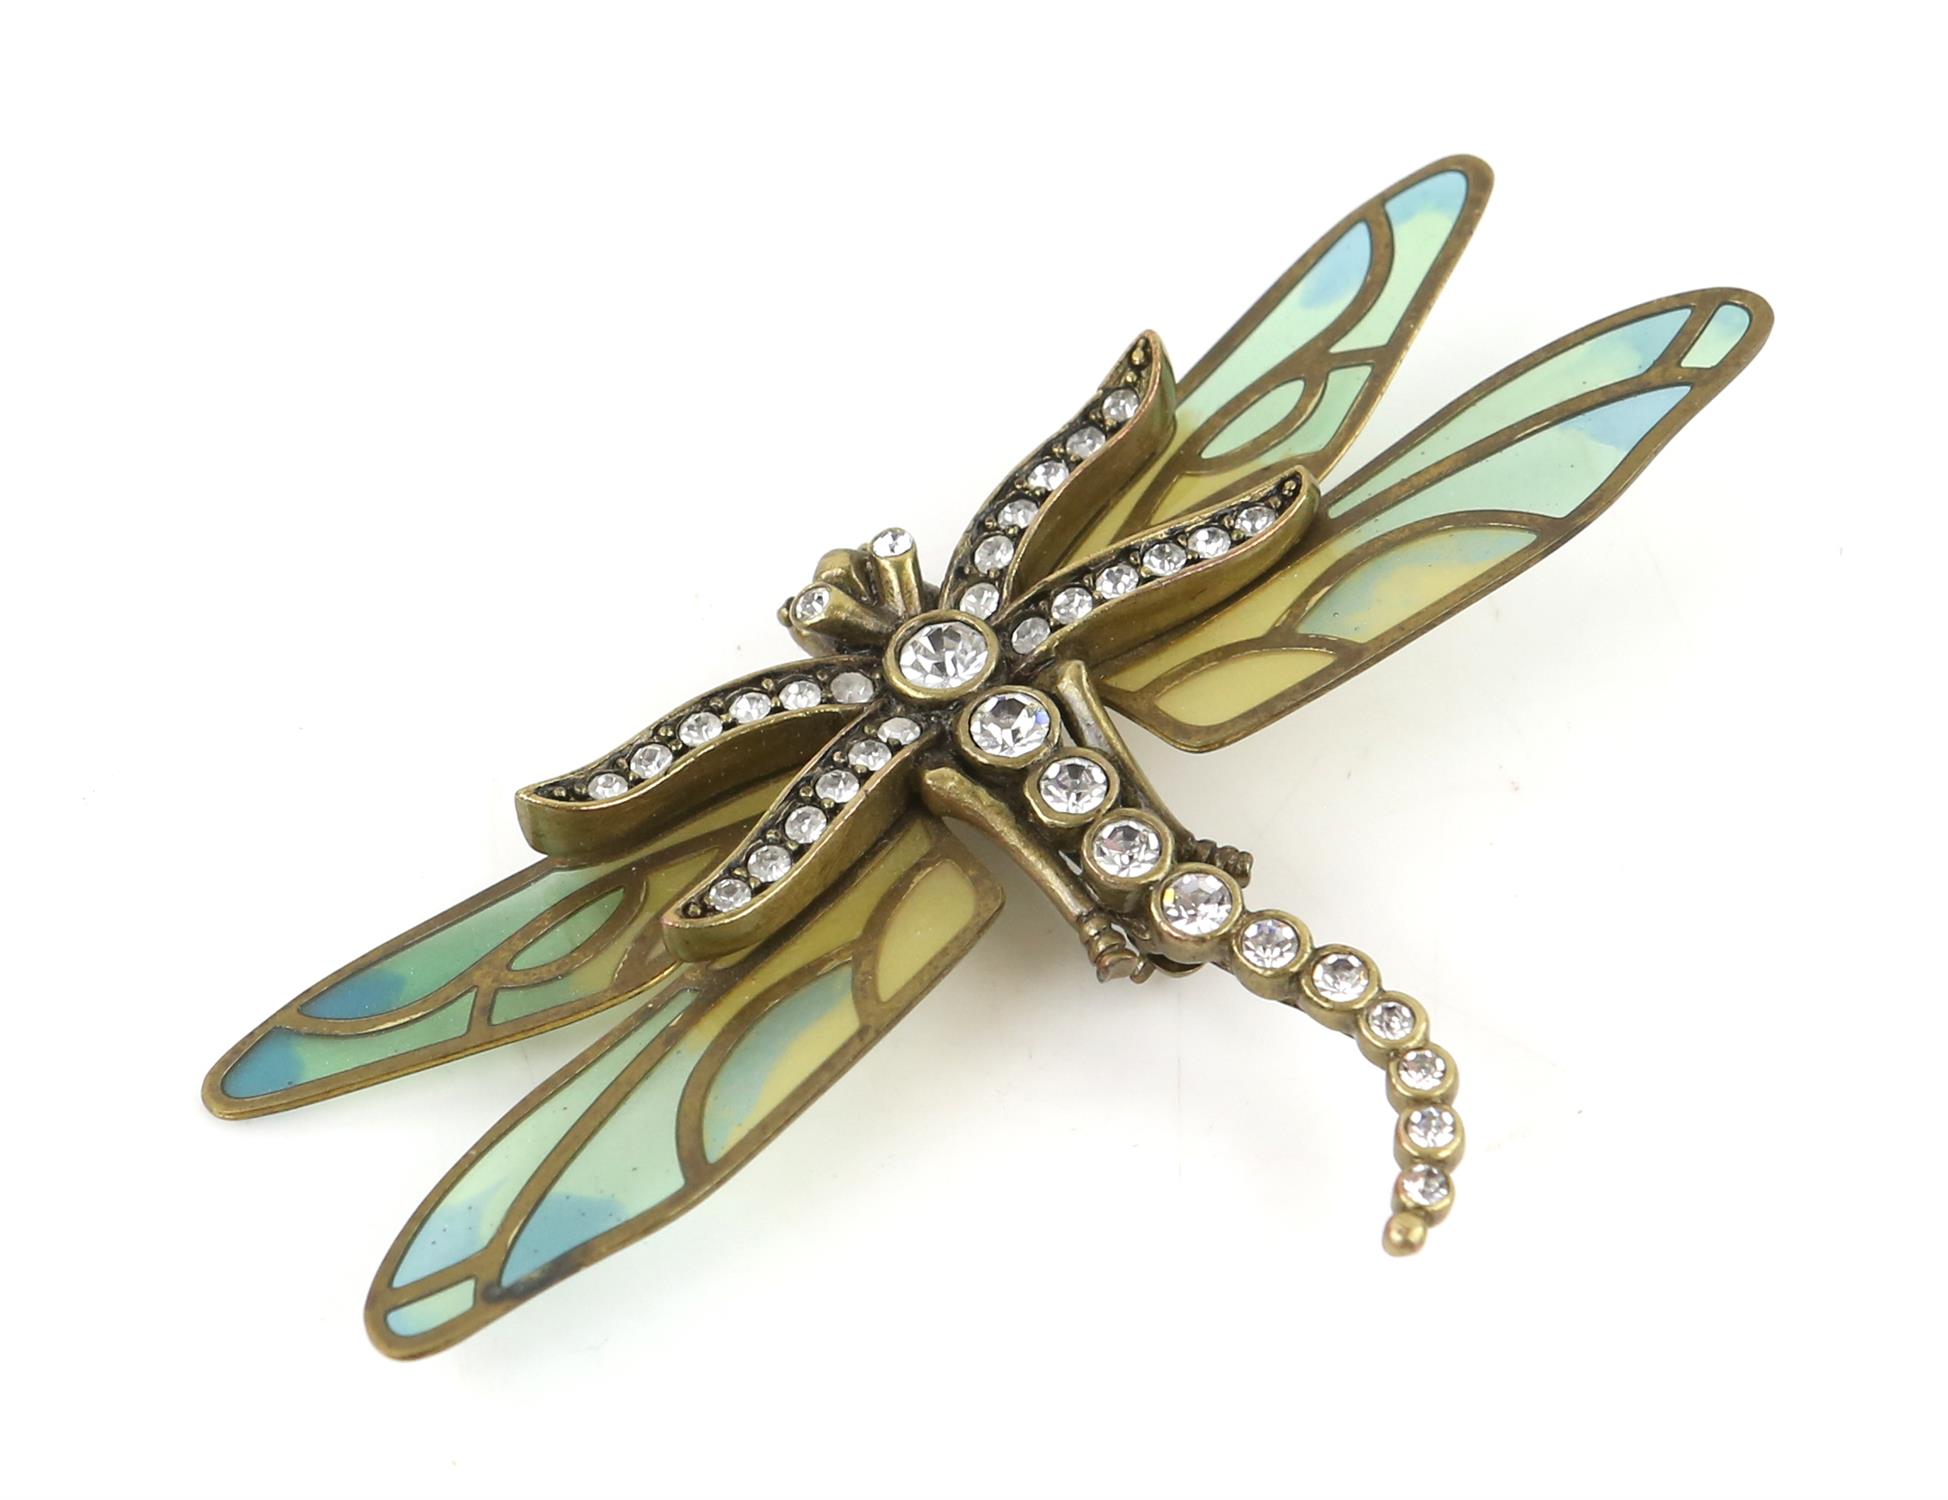 Kenneth Jay Lane Dragonfly brooch with blue and green mosaic wings, mounted in base metal, - Image 5 of 7